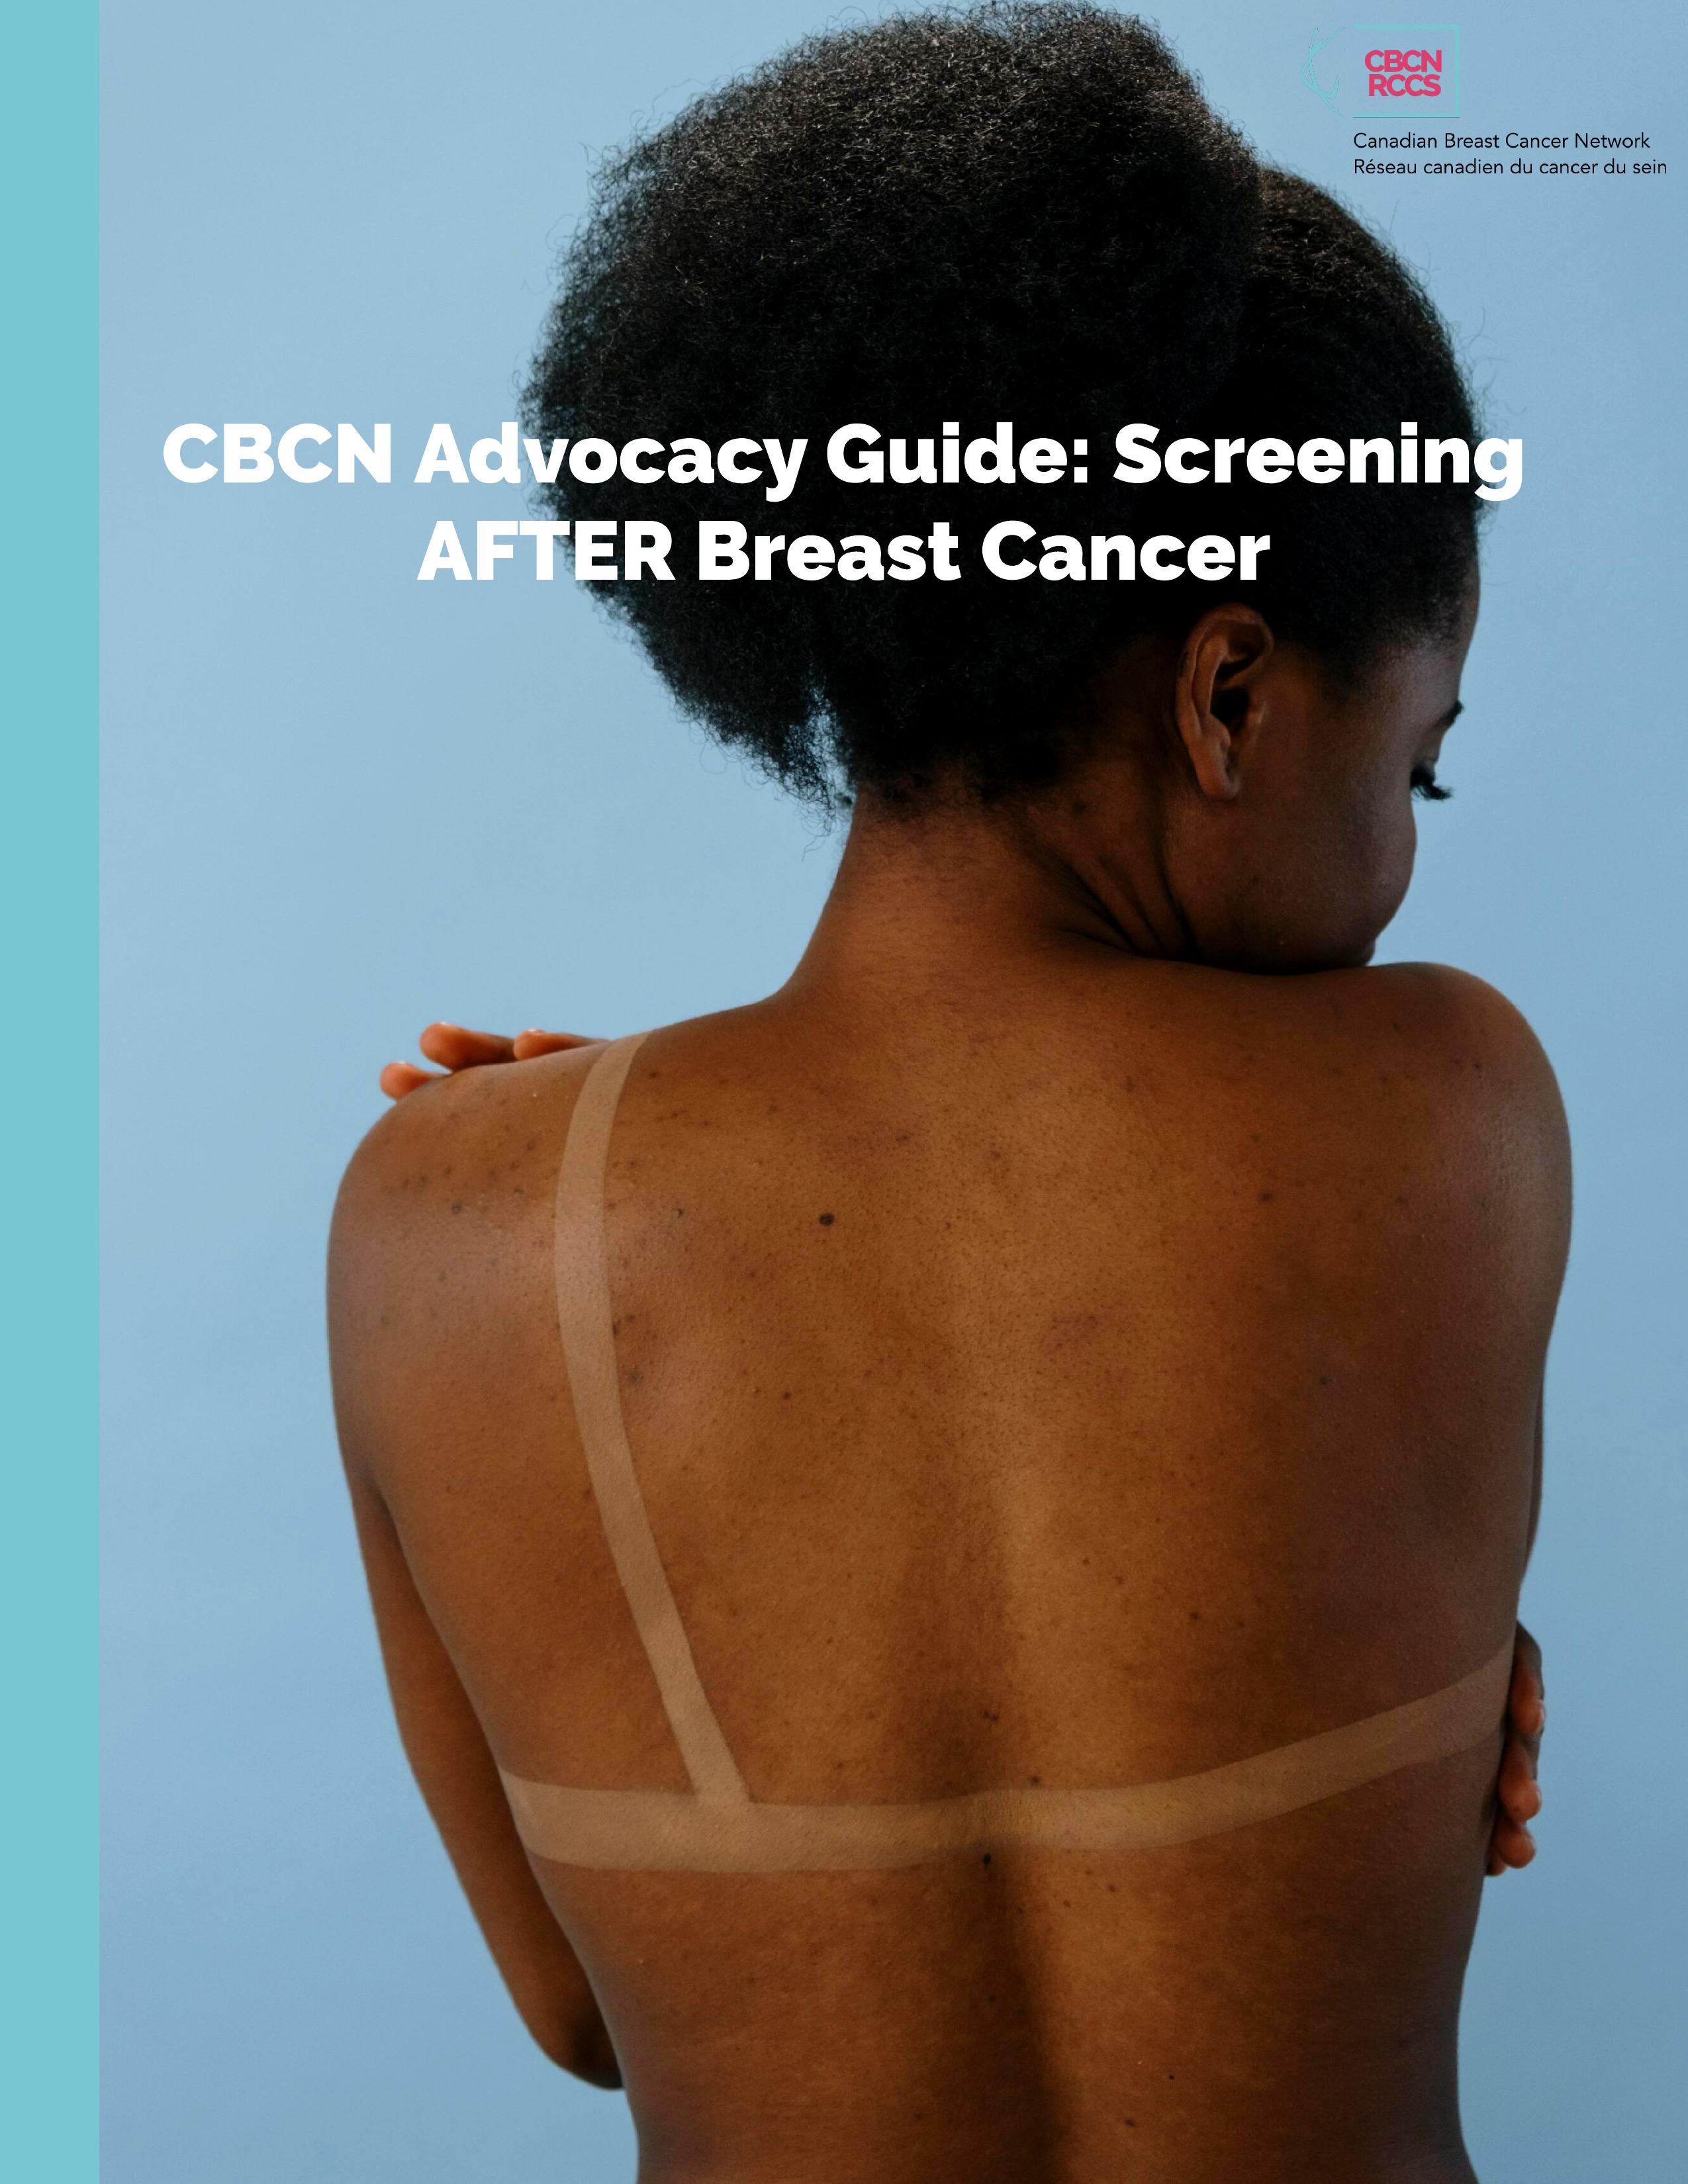 CBCN Advocacy Guide: Screening After Breast Cancer